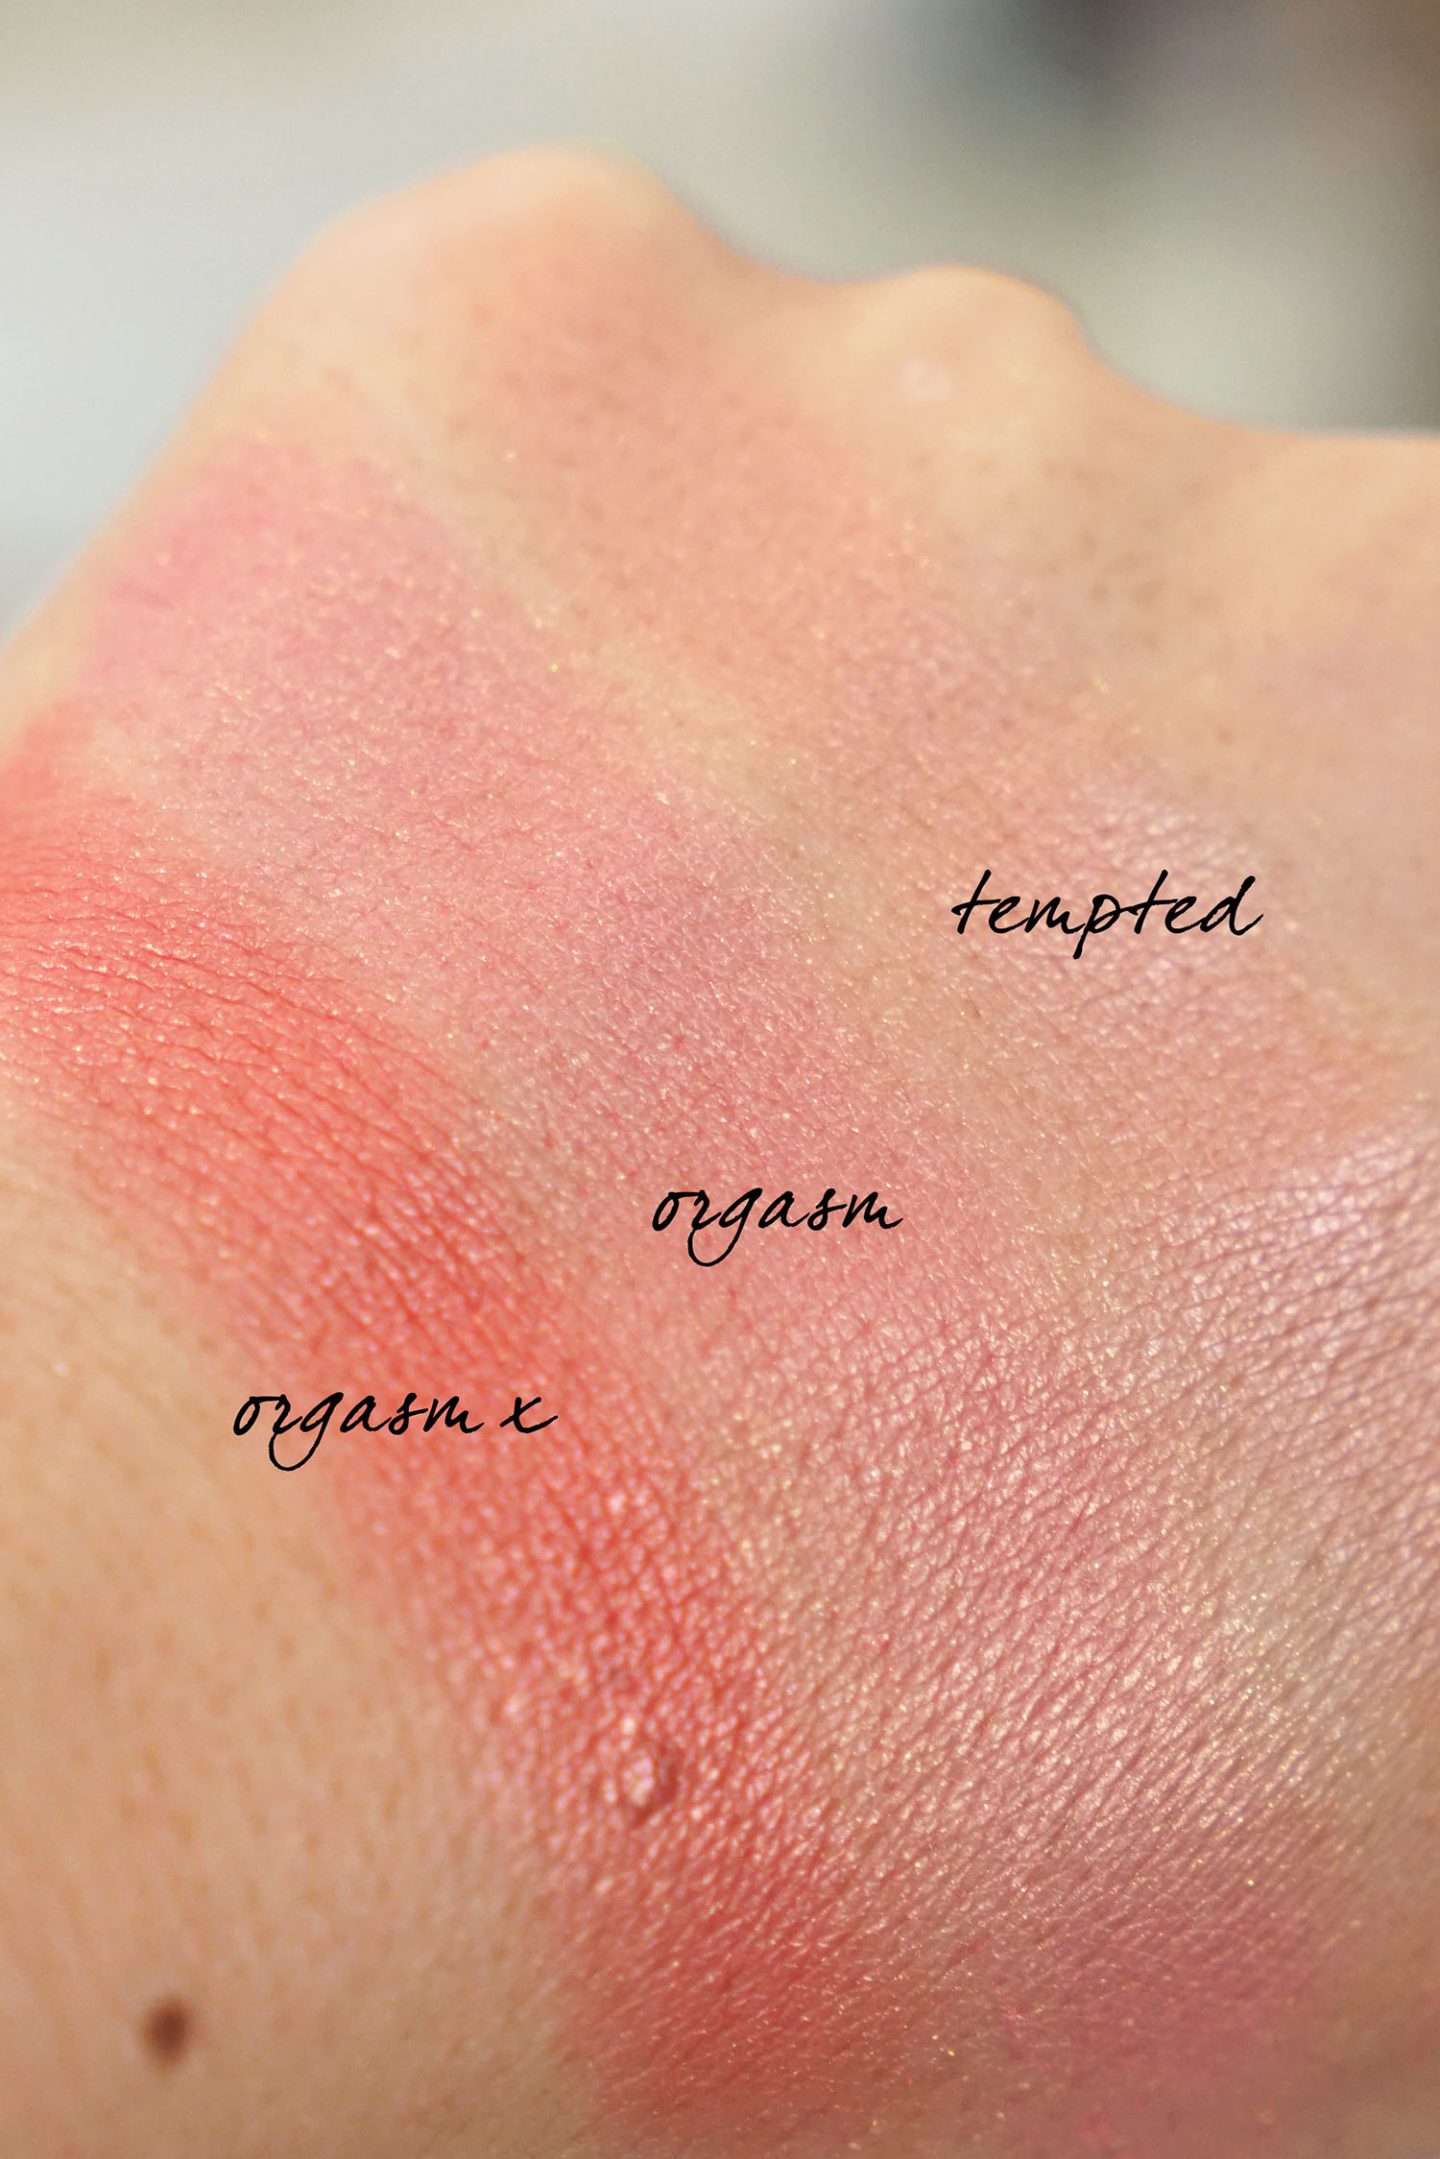 NARS Orgasm X, Orgasm and Tempted Blush swatches